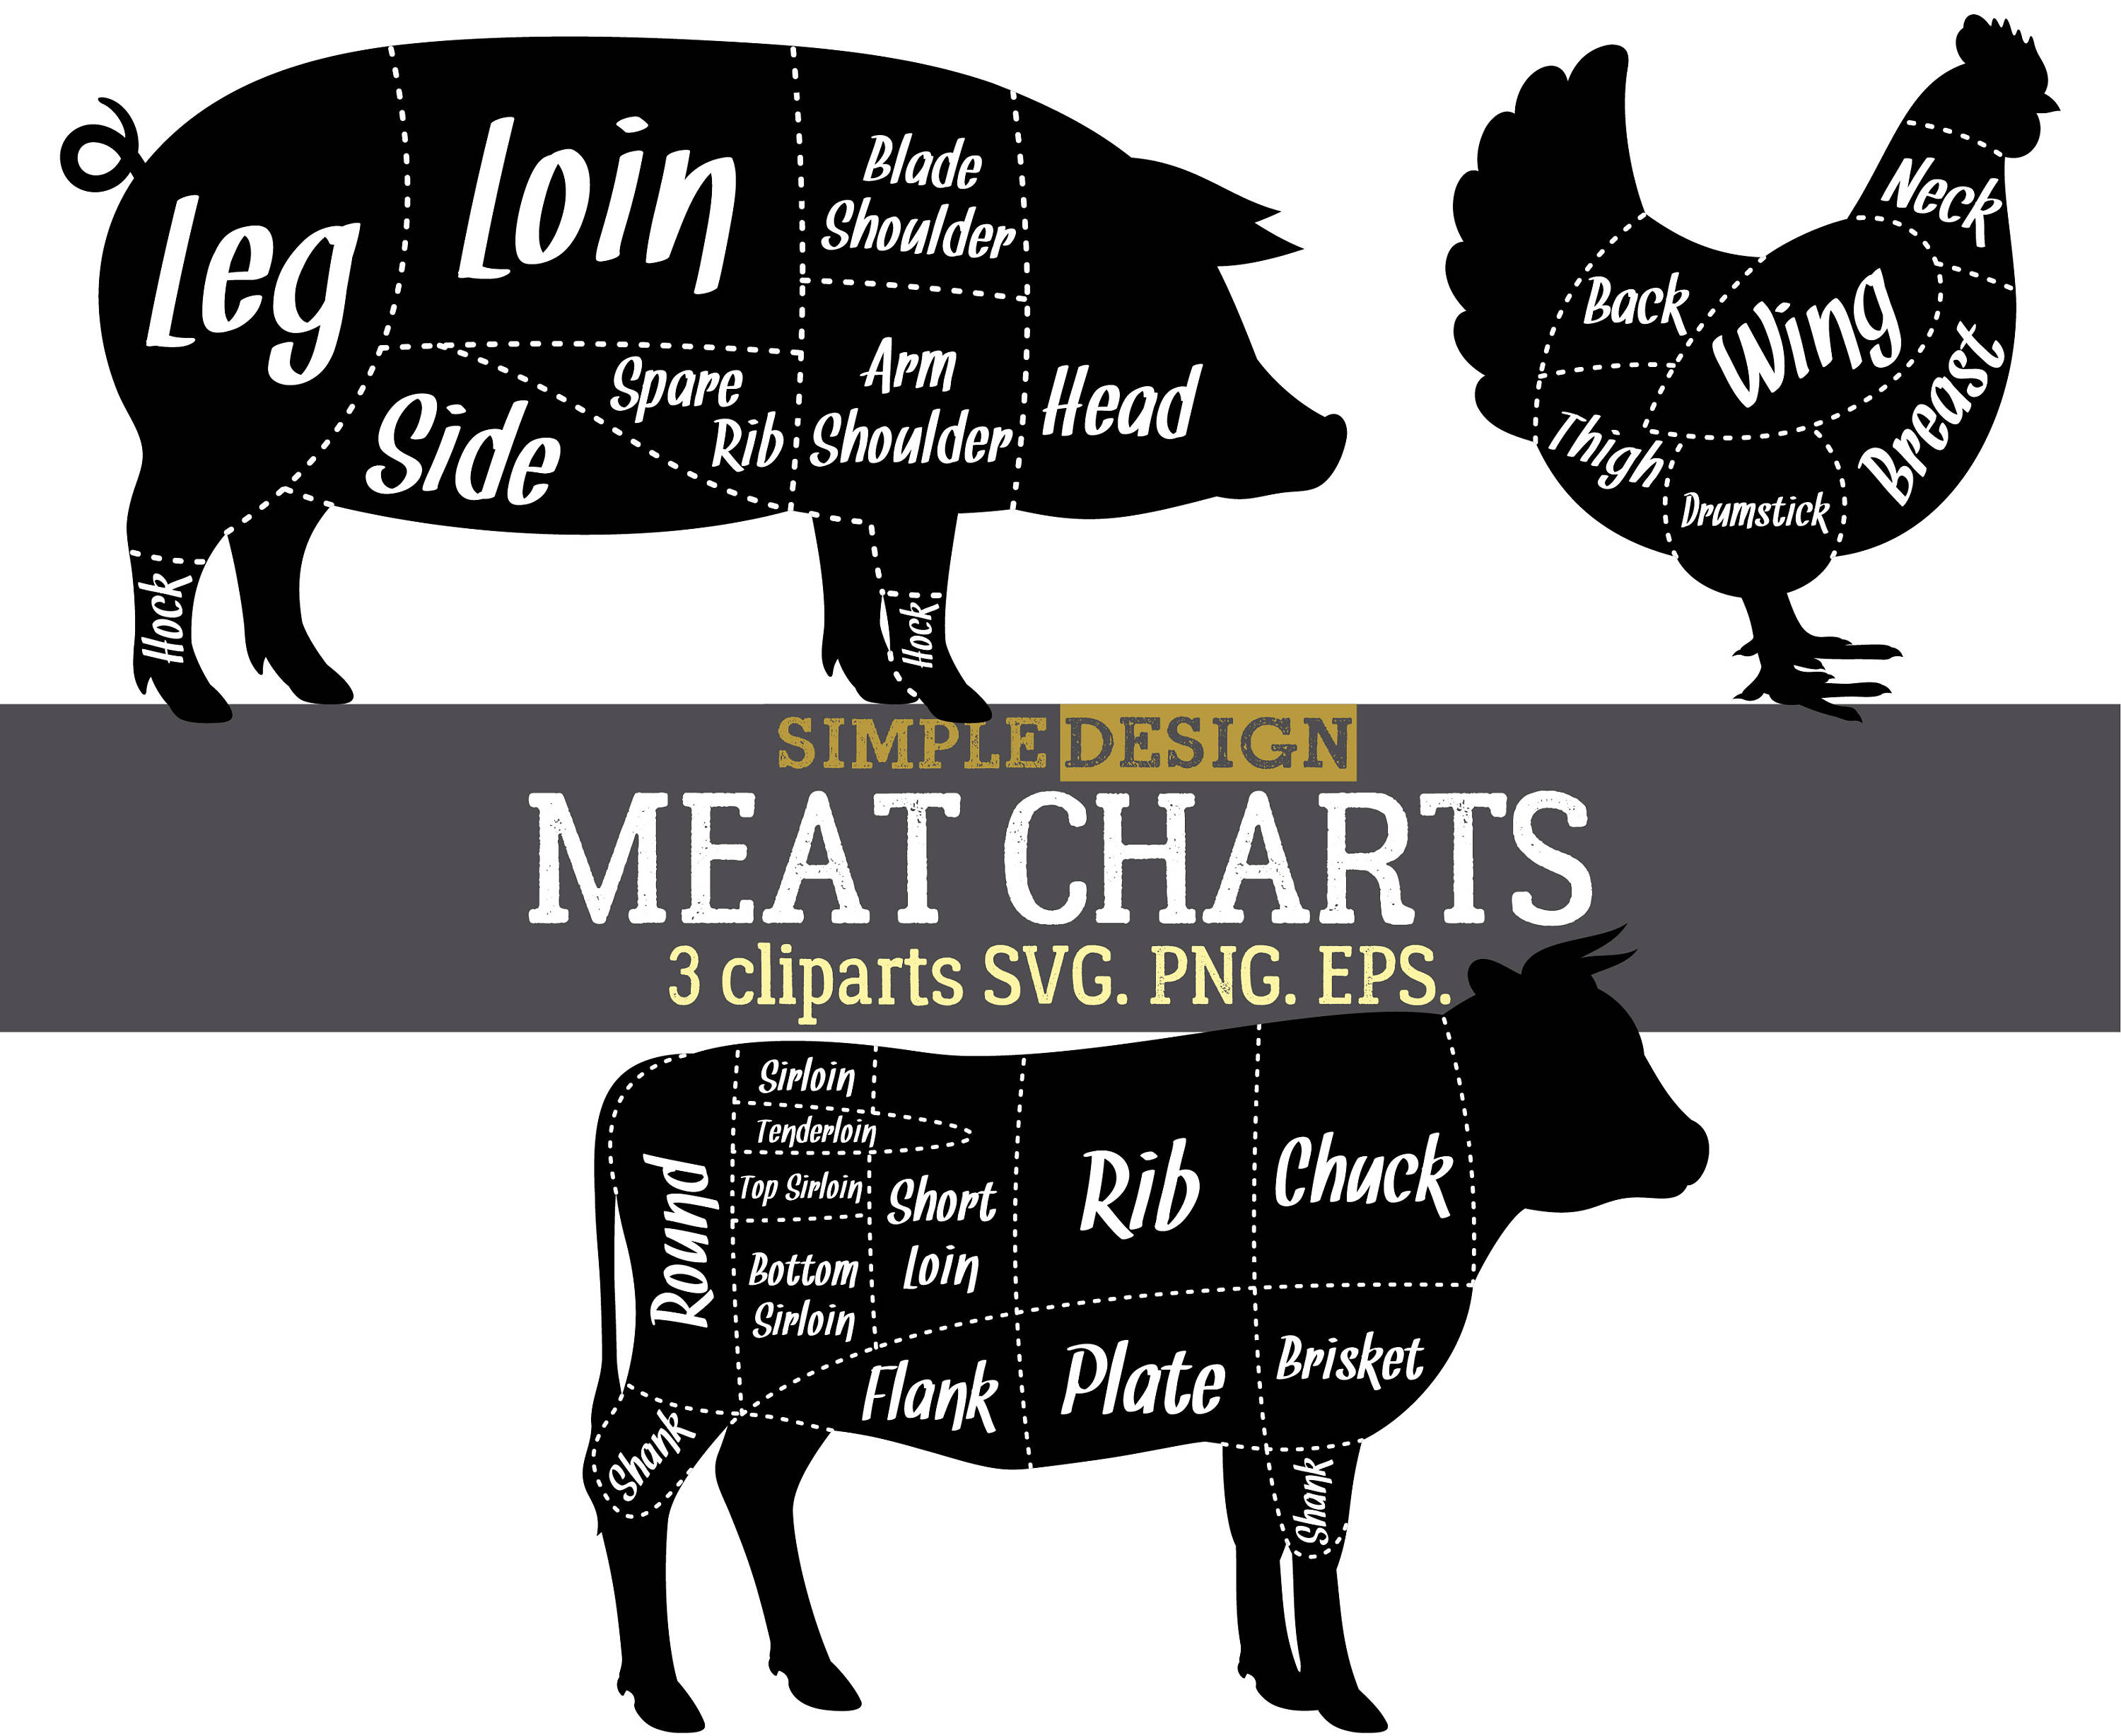 Meat charts svg beaf. Back clipart cow